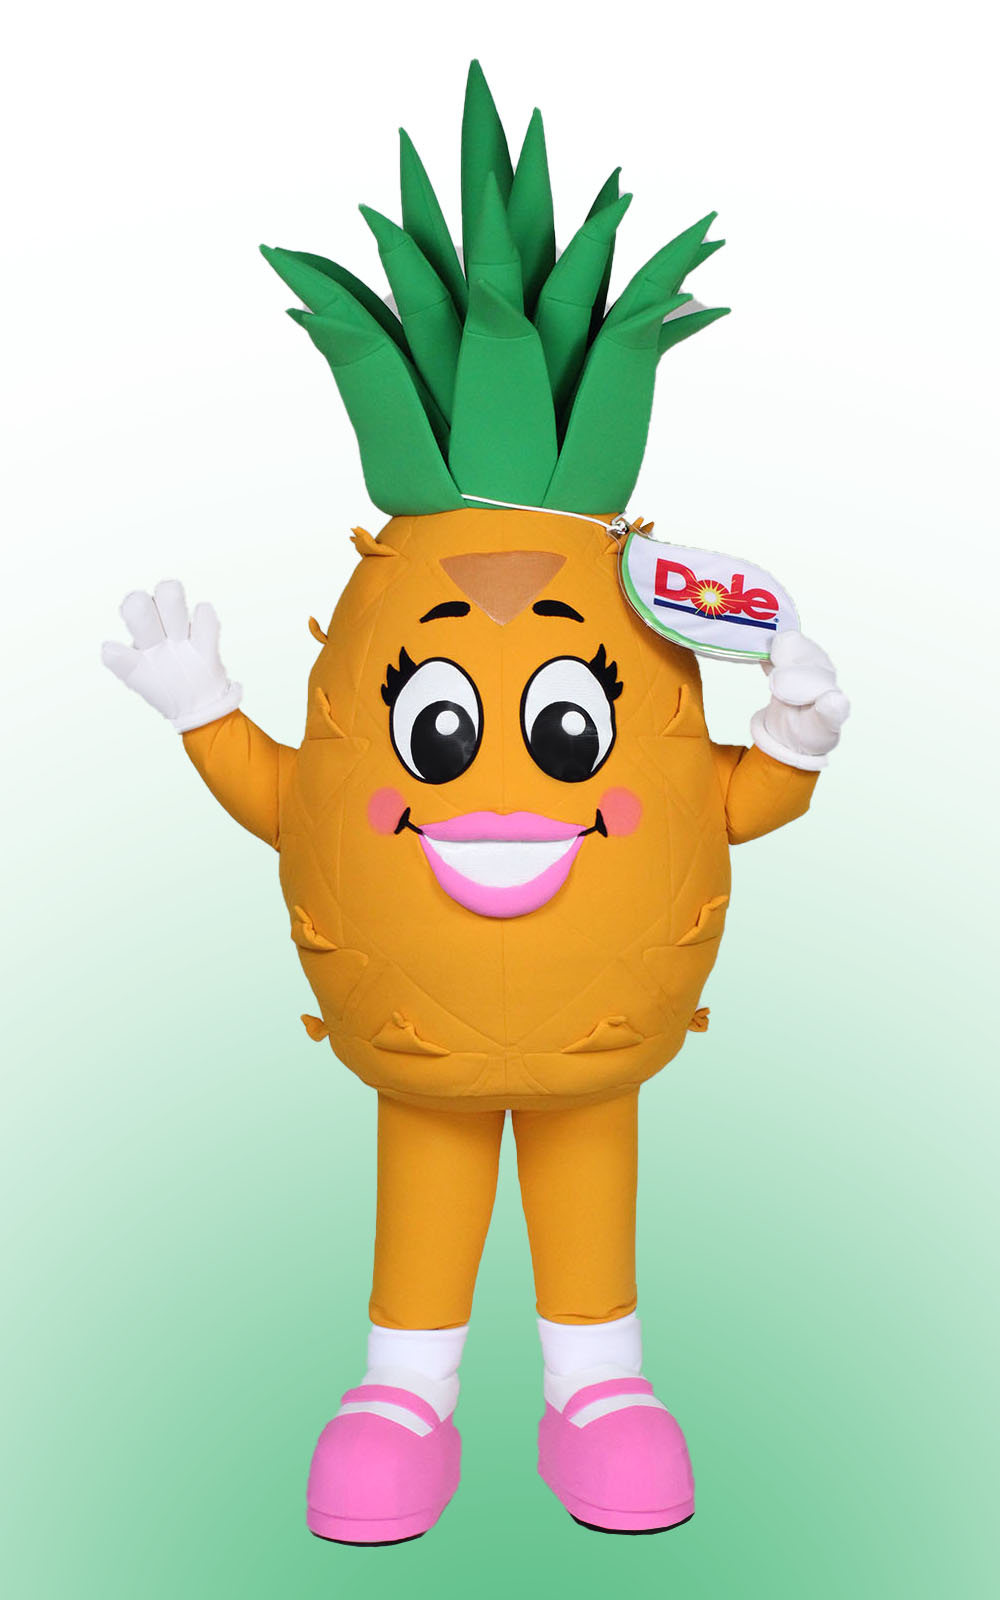 Mascot Costume of the Pinellopy Character for Dole. Mascot is shaped like a large pineapple with pineapple with green leaves on top and a Dole Tag.